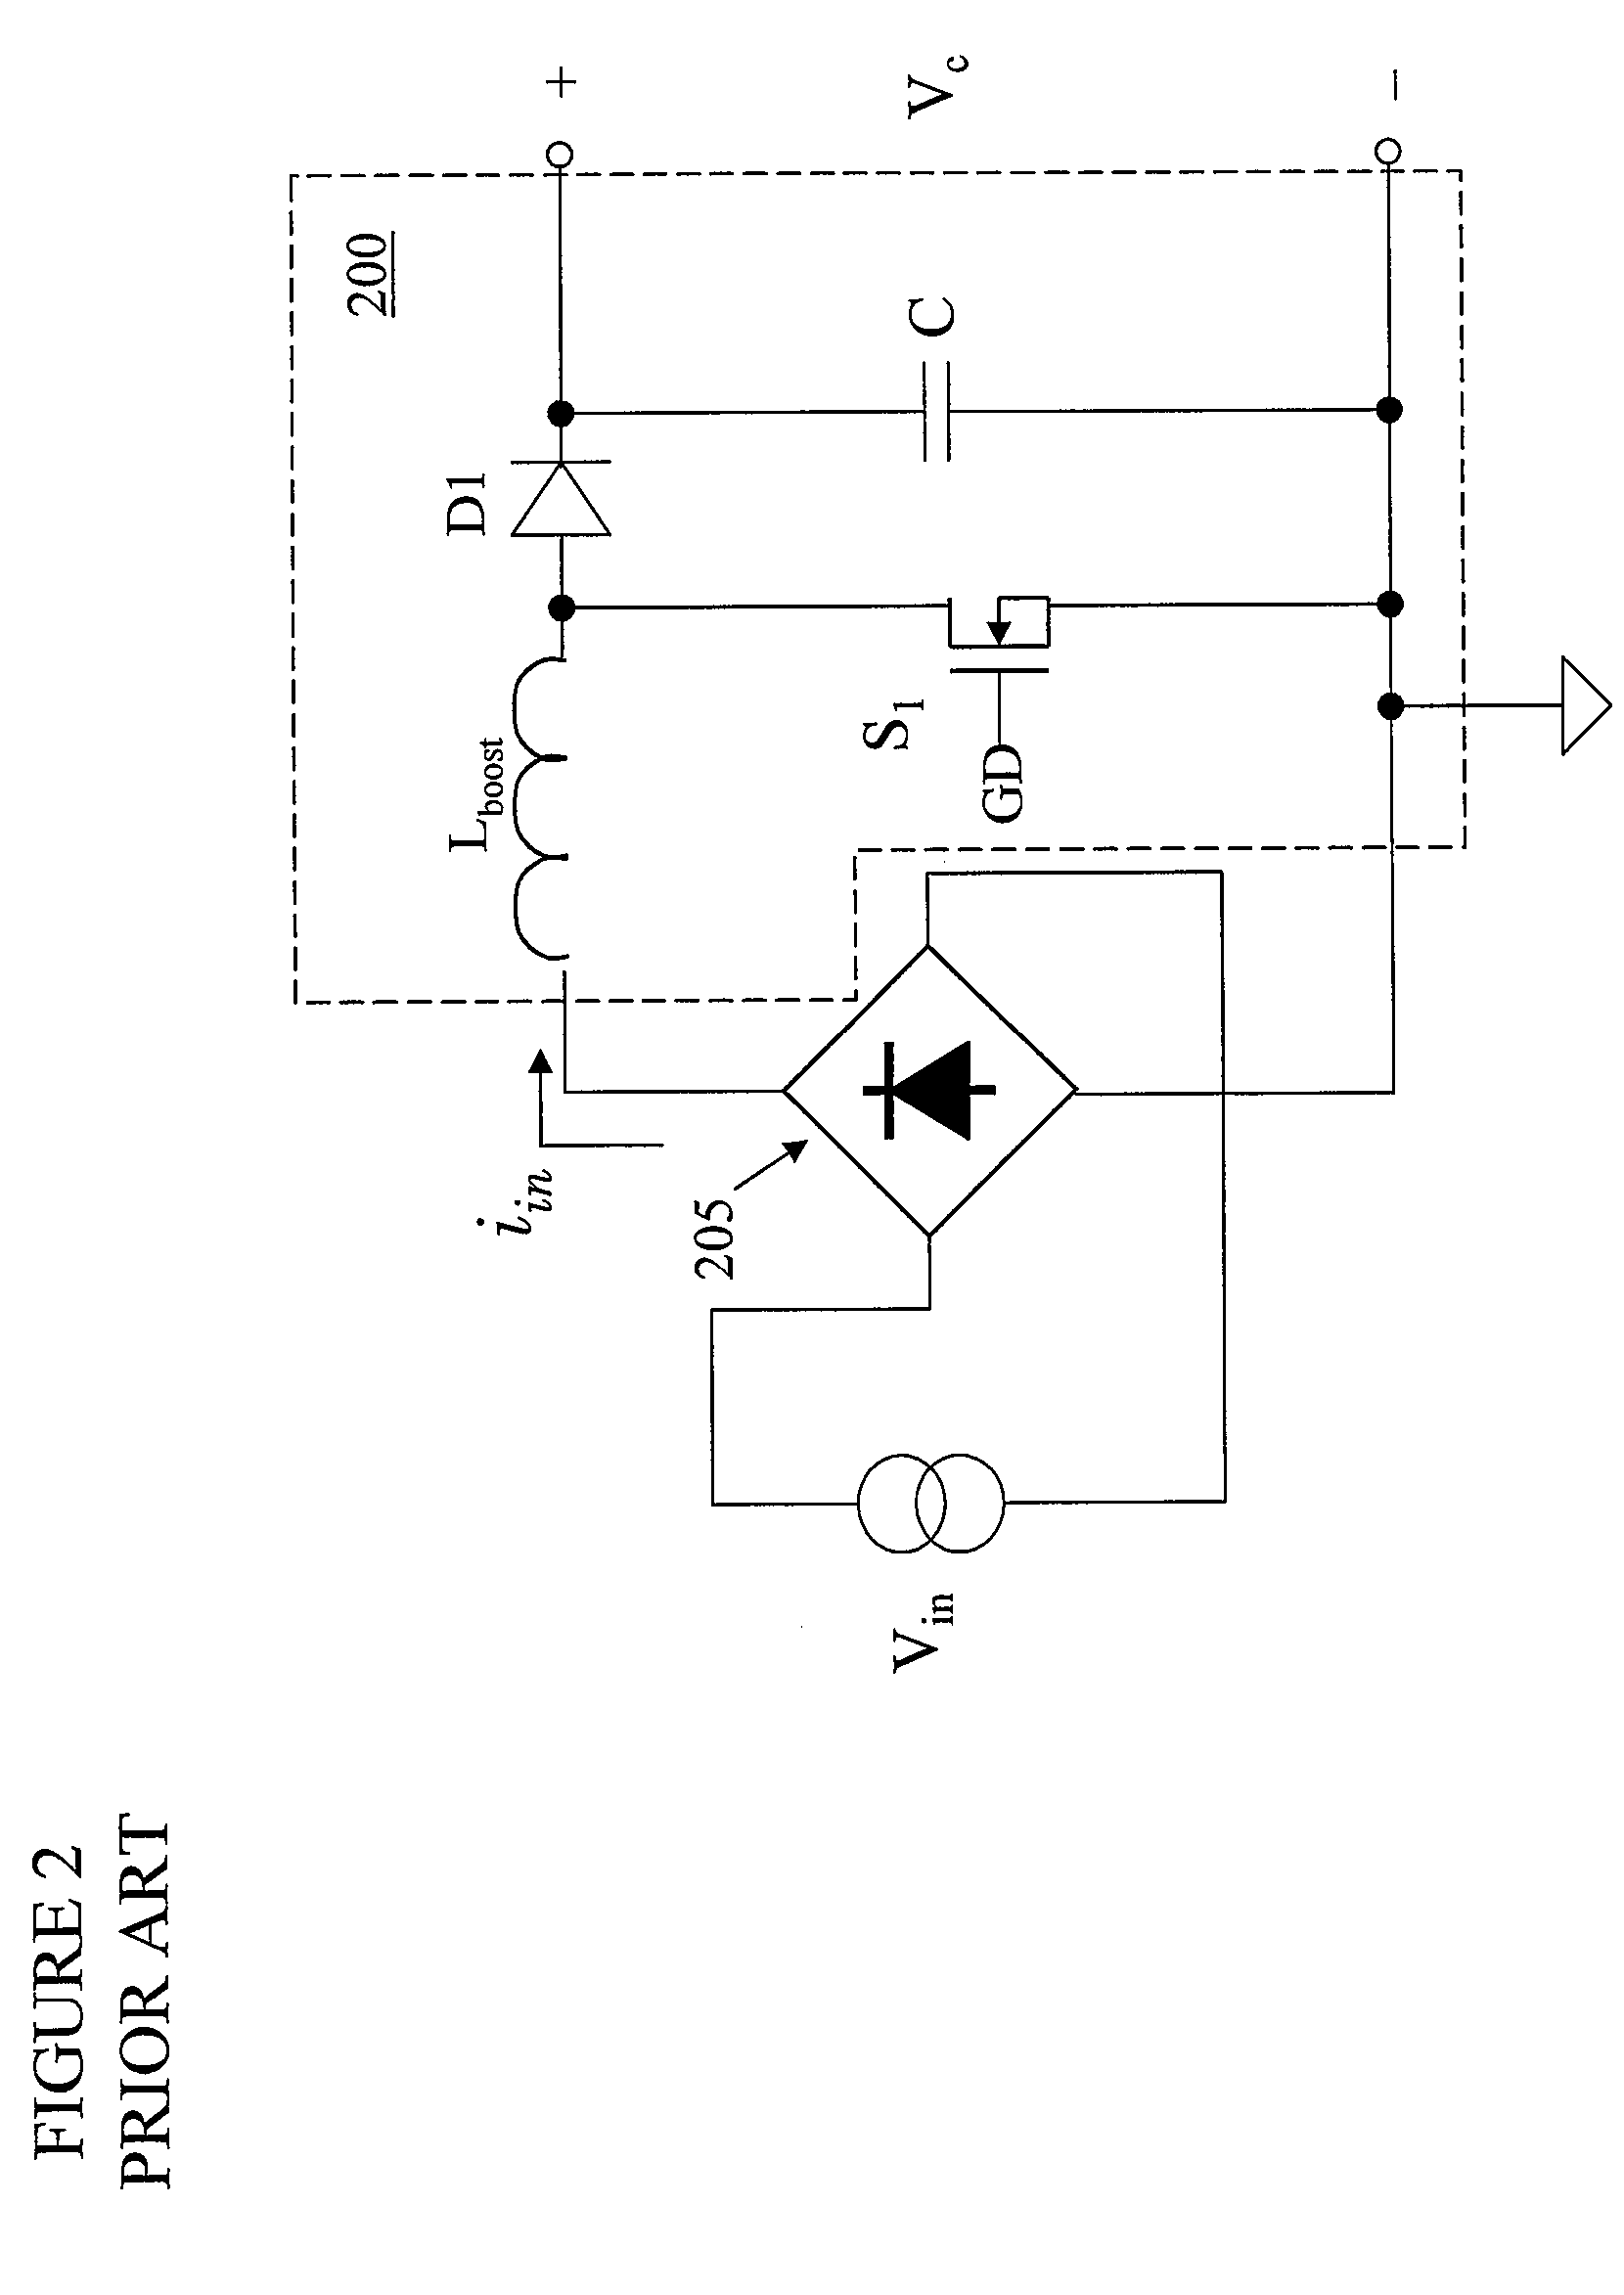 Power Converter Employing Regulators with a Coupled Inductor